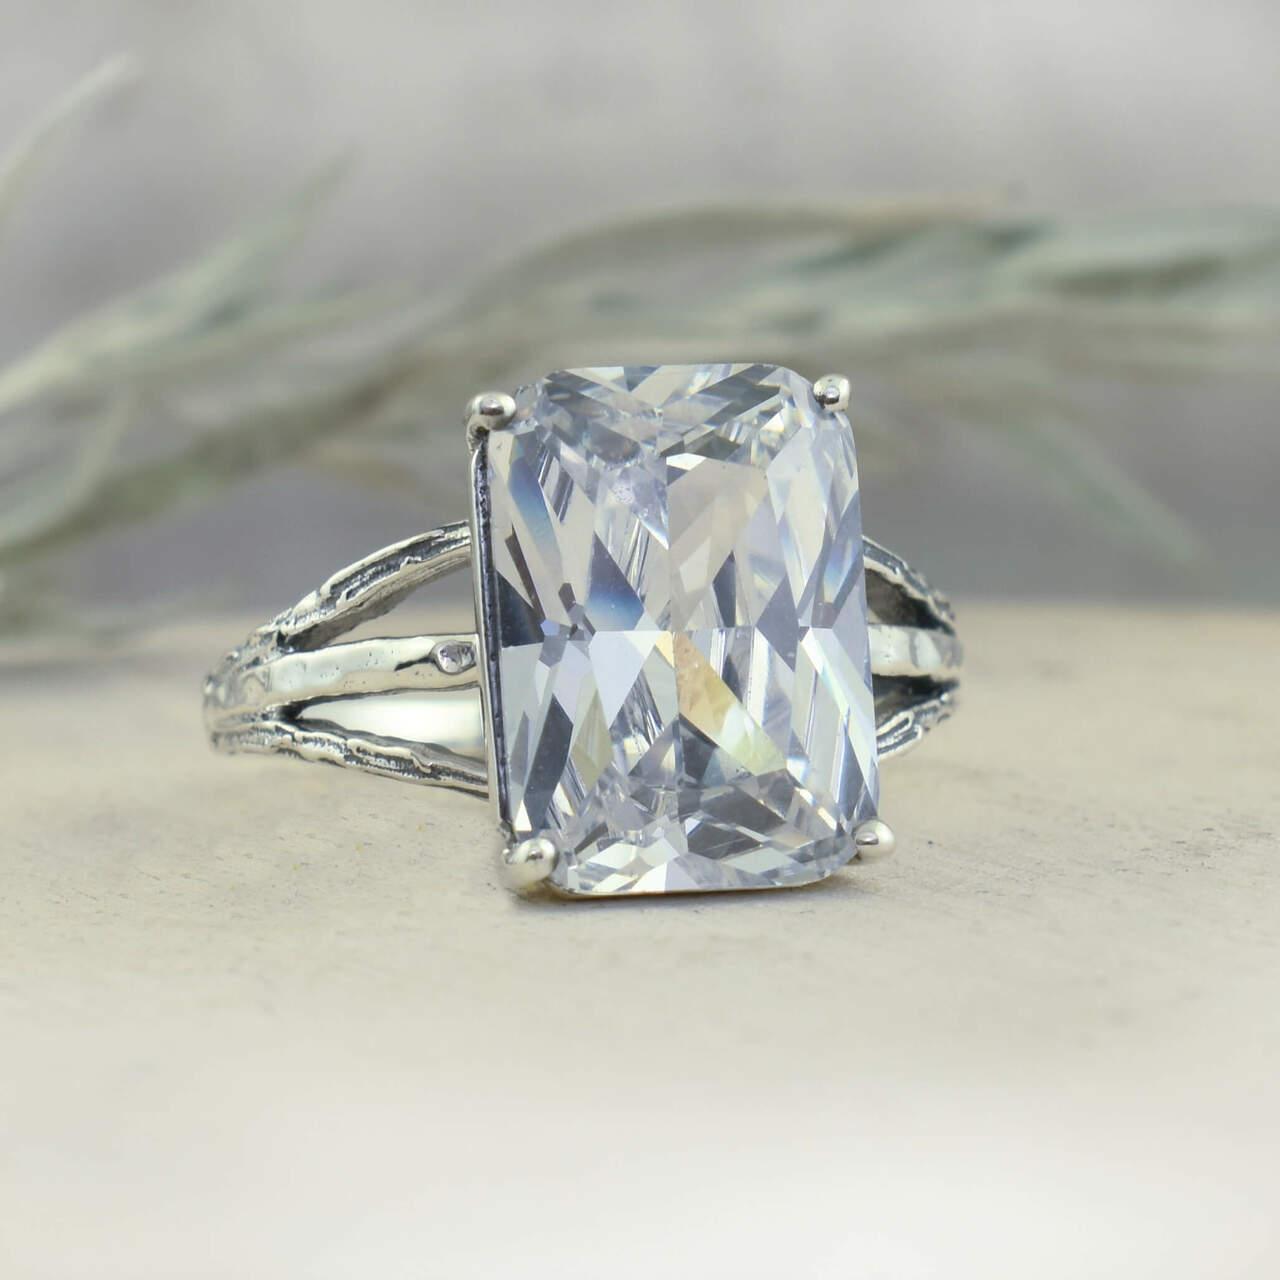 Handcrafted sterling silver ring with large emerald cut CZ stone